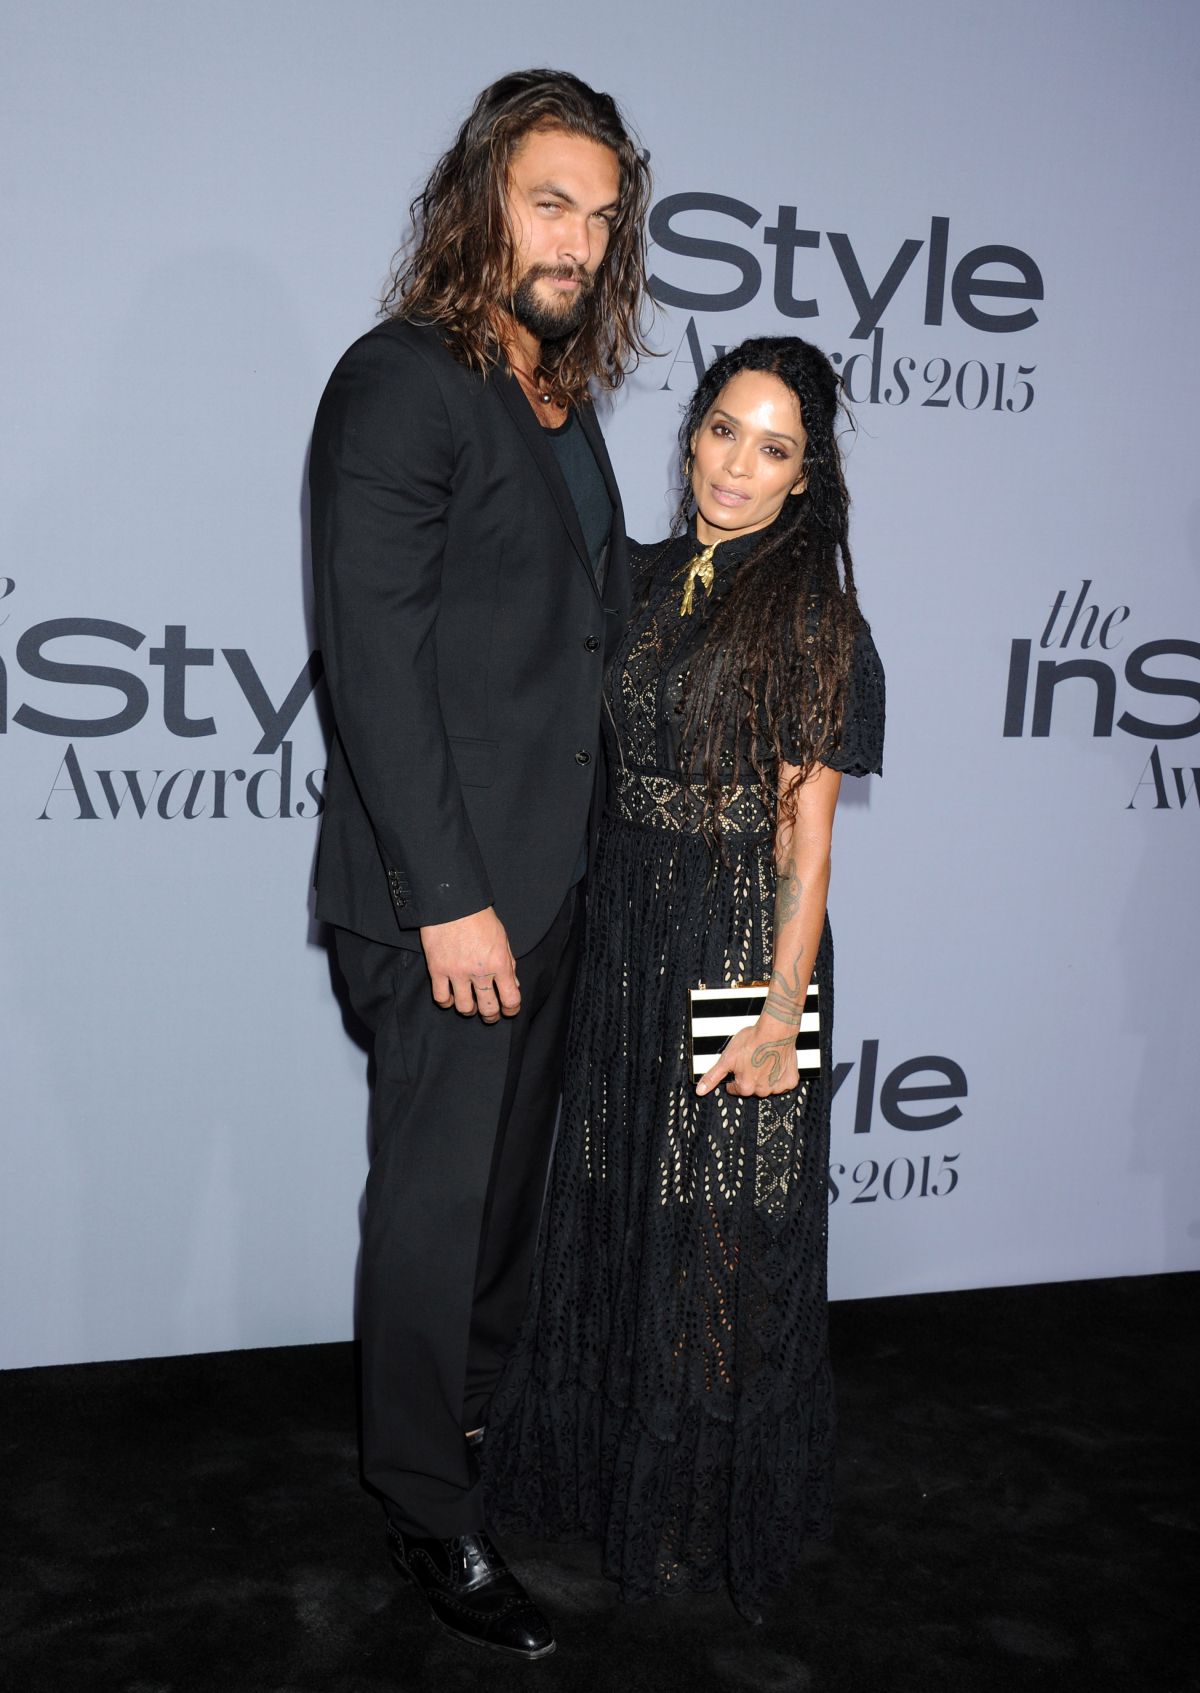 Actors Jason Momoa and Lisa Bonet attend the InStyle 